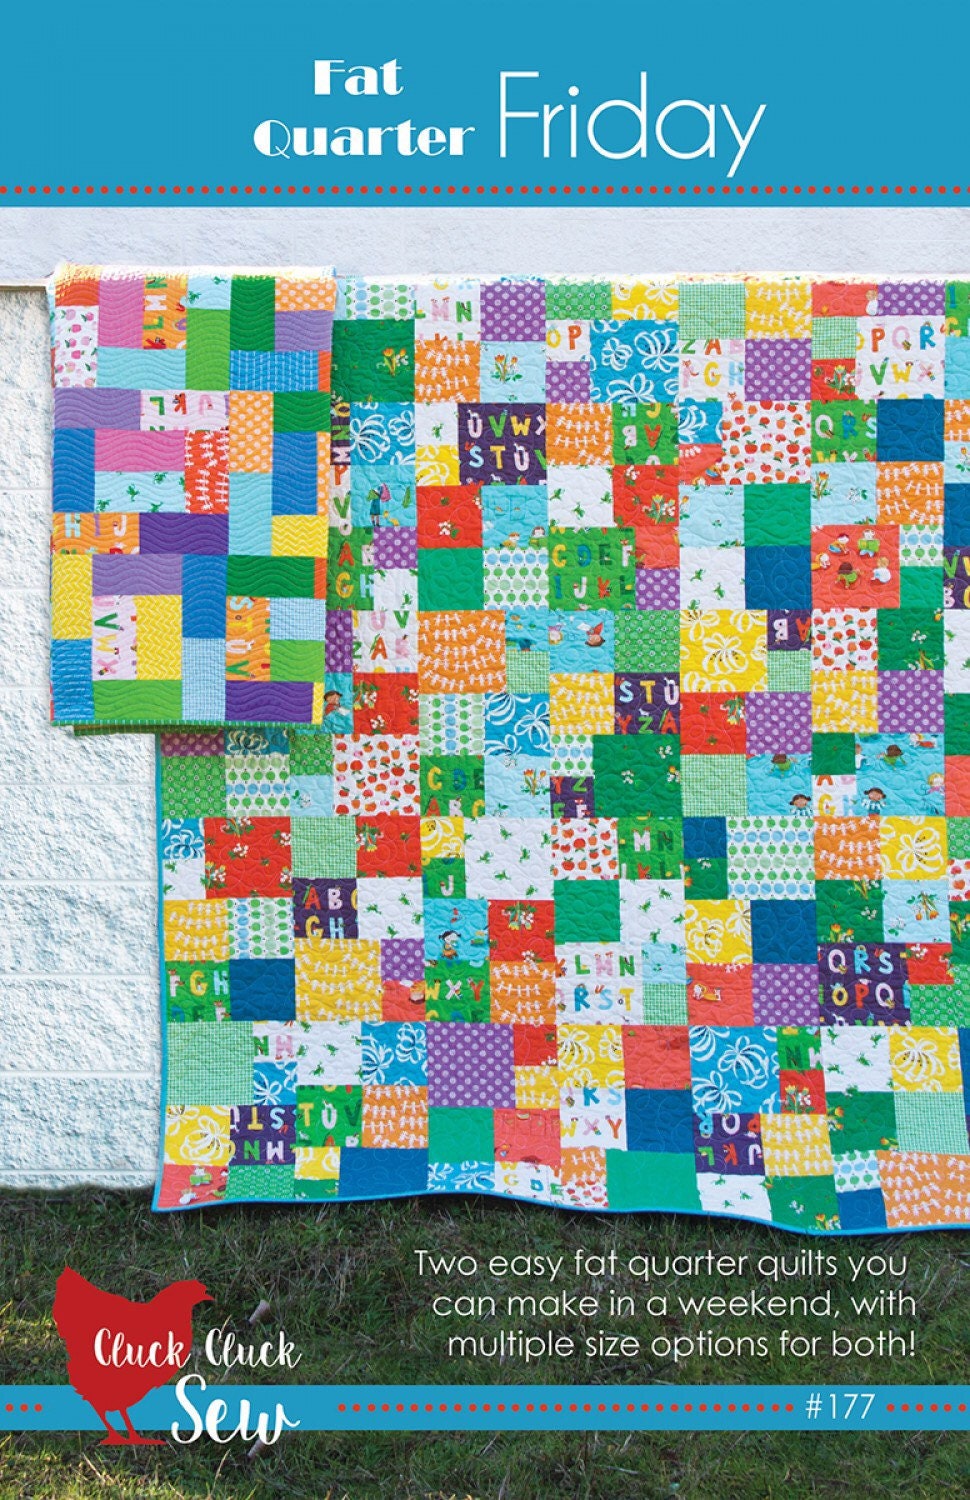 Fat Quarter Friday Quilt Pattern - Cluck Cluck Sew - Fat Quarter Friendly - 5 sizes - 2 patterns included